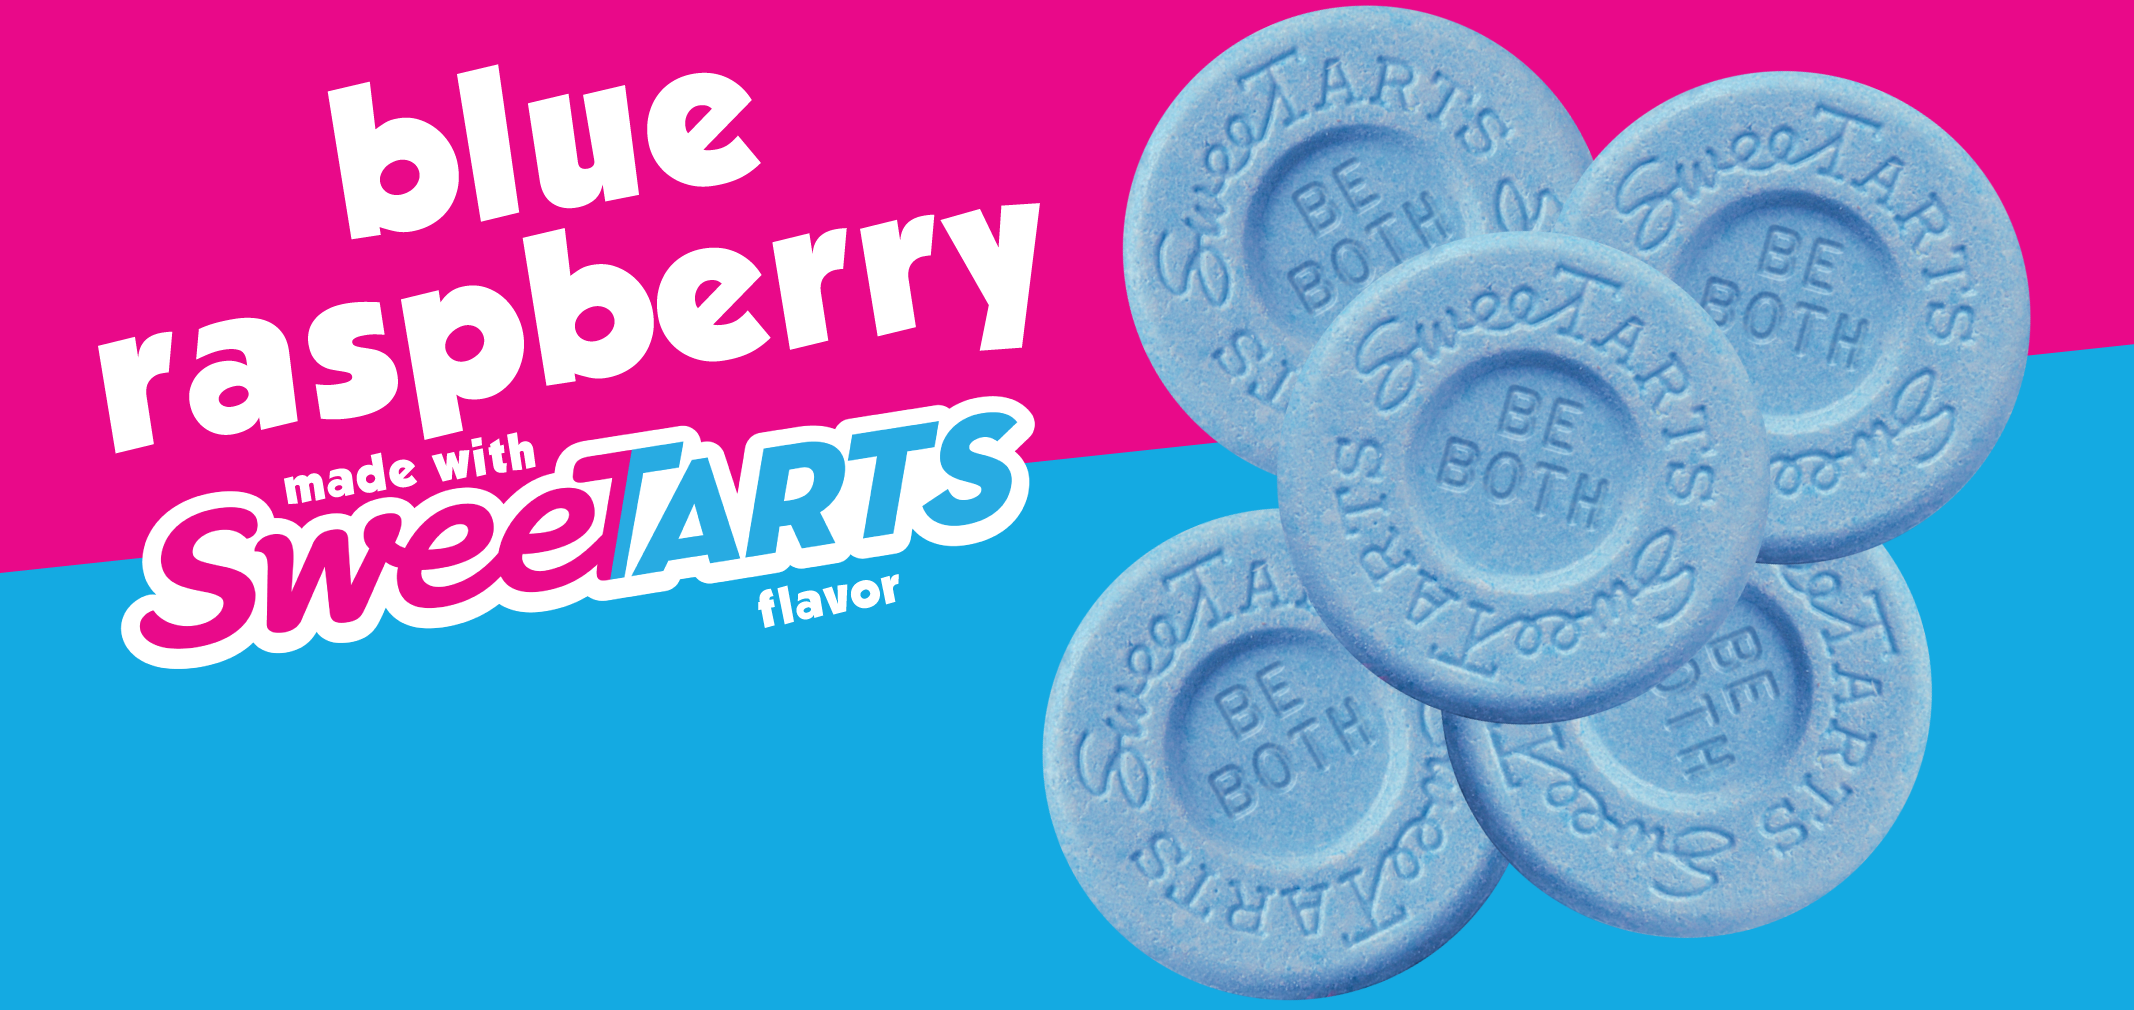 blue raspberry made with  SweeTARTS flavor label image